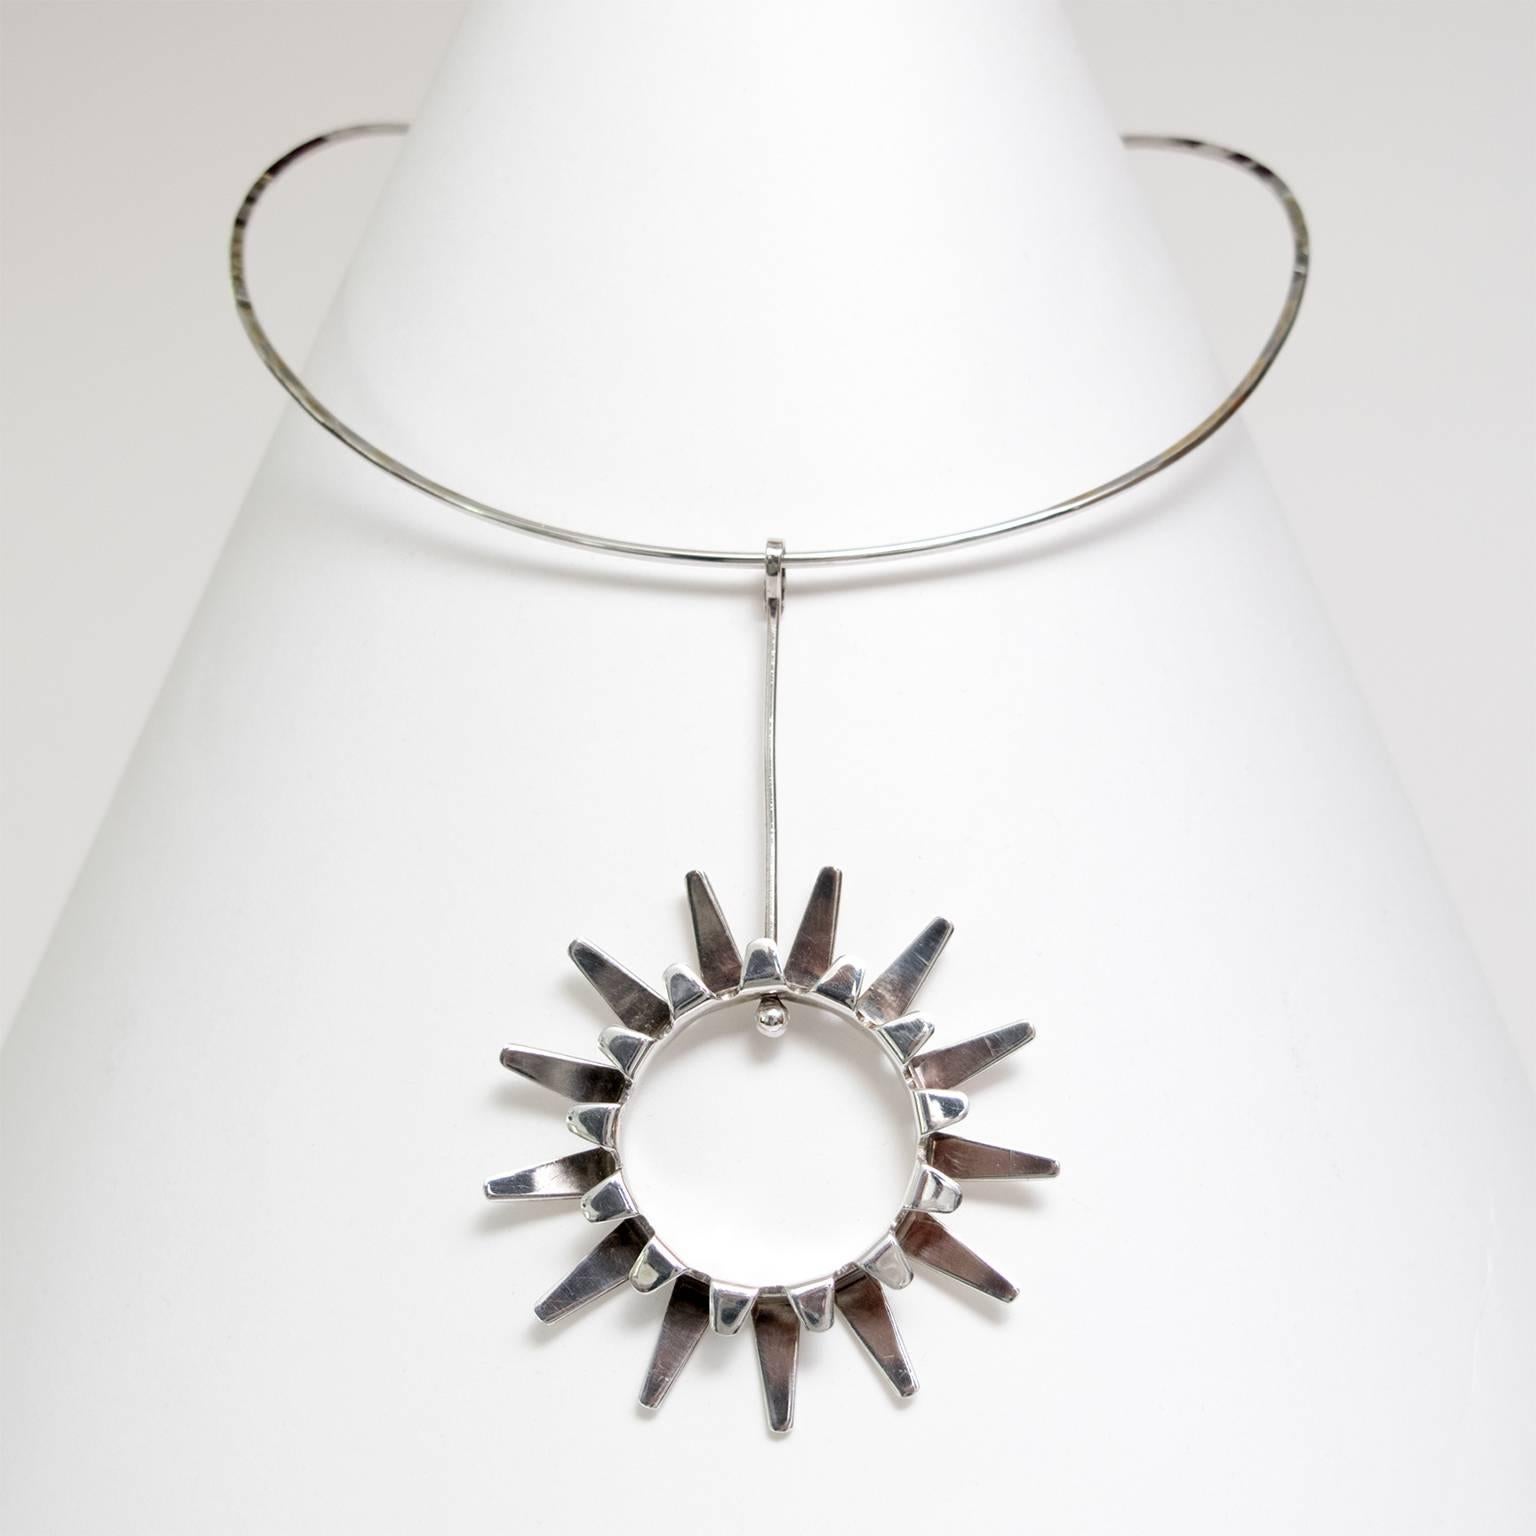 Scandinavian Modern Sterling silver necklace and sun pendant designed by Tone Vigeland for Designs Plus Studios, Norway circa 1970.
Width: 5.5